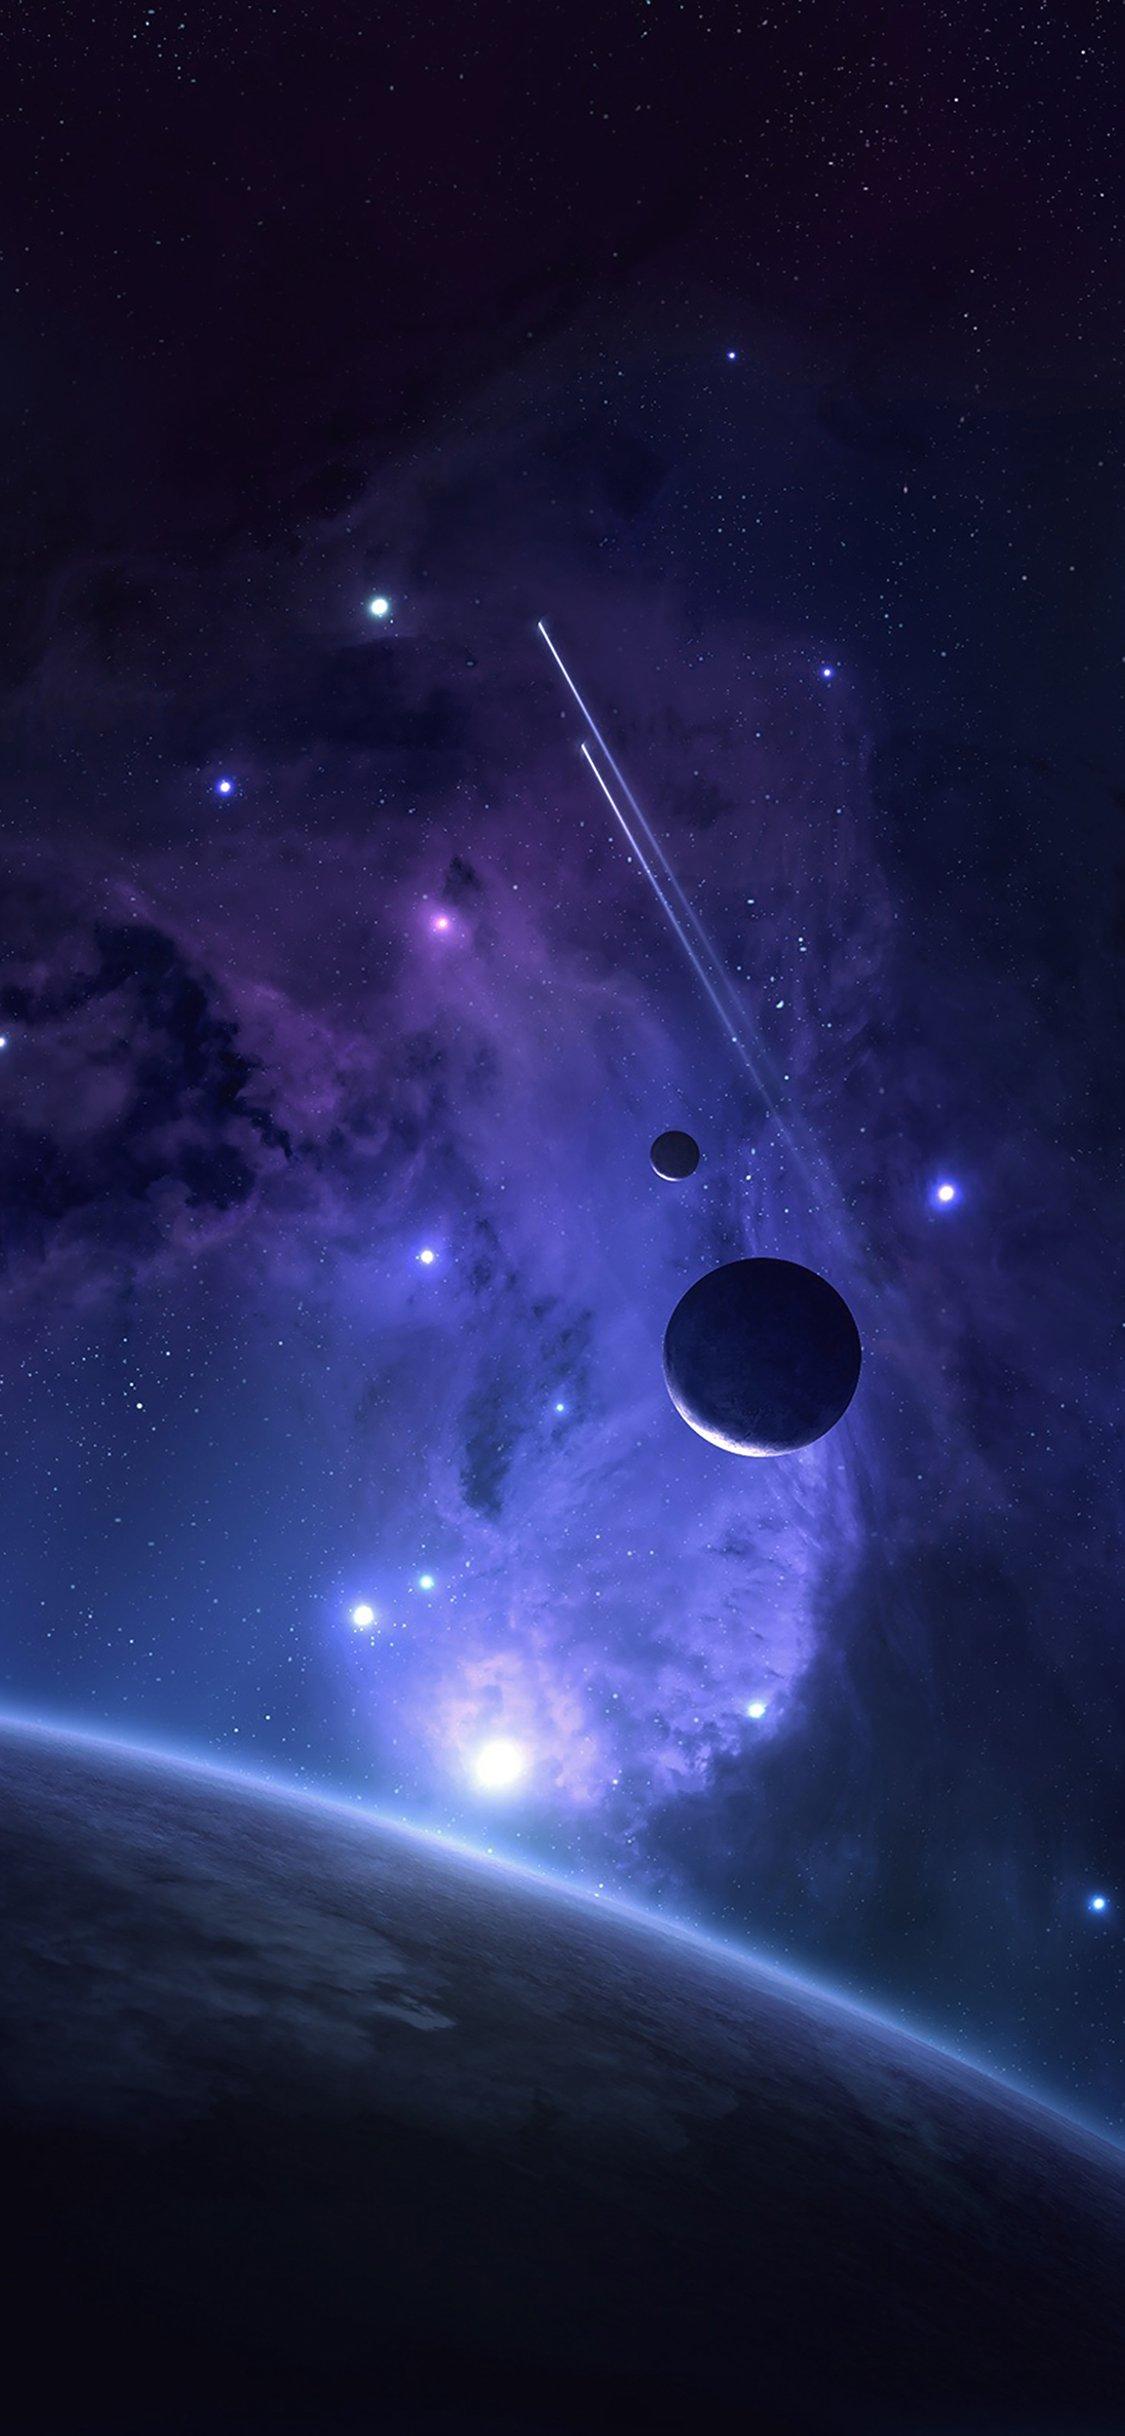 iPhone X wallpaper. planets space